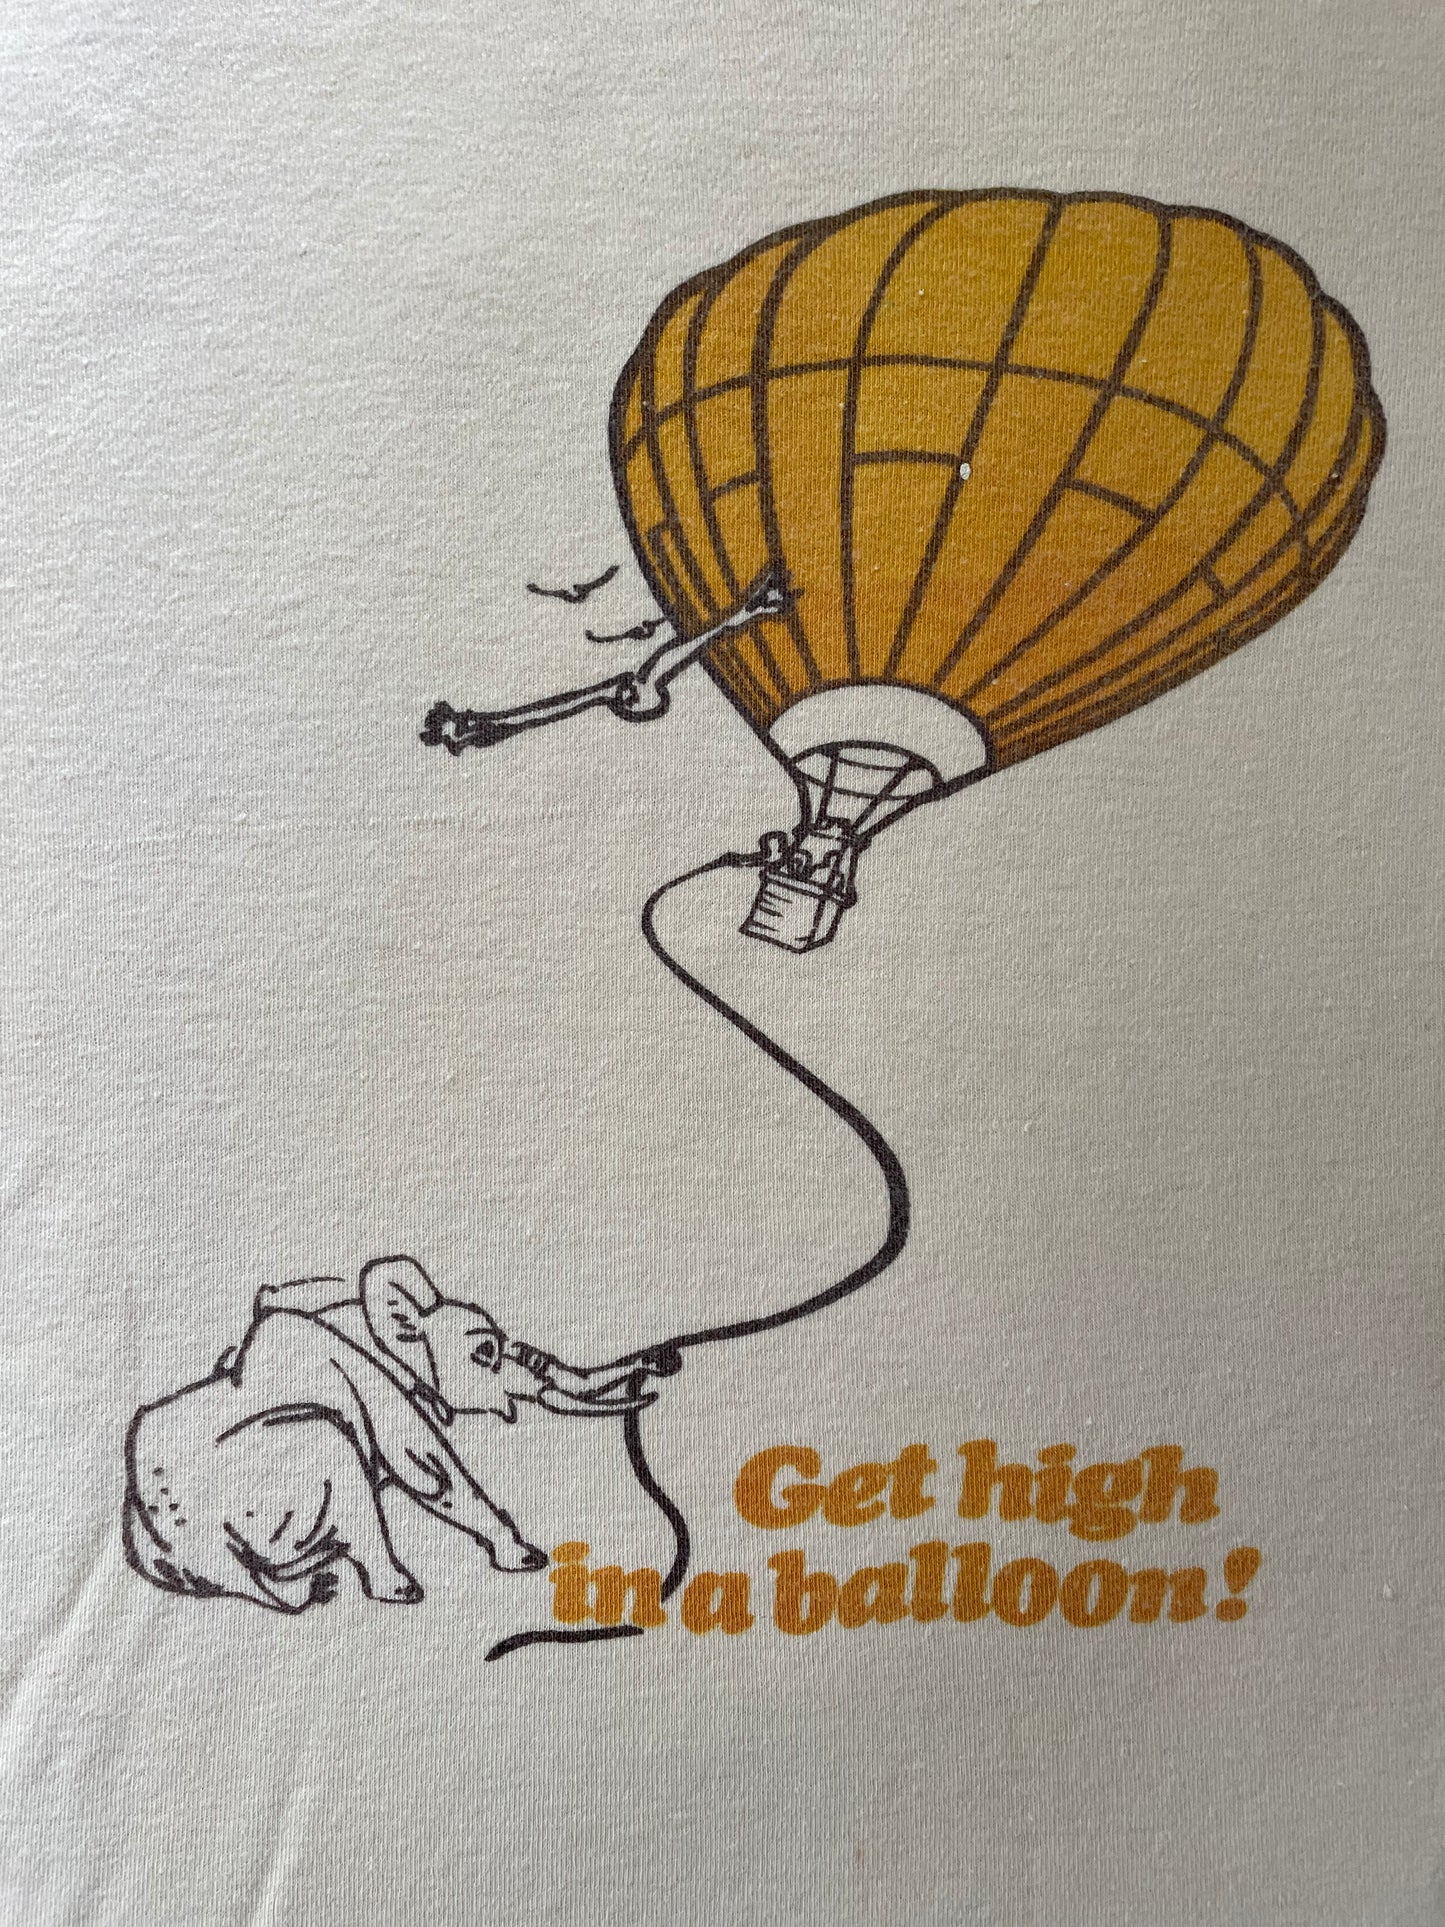 70s Get High In A Balloon! Tee